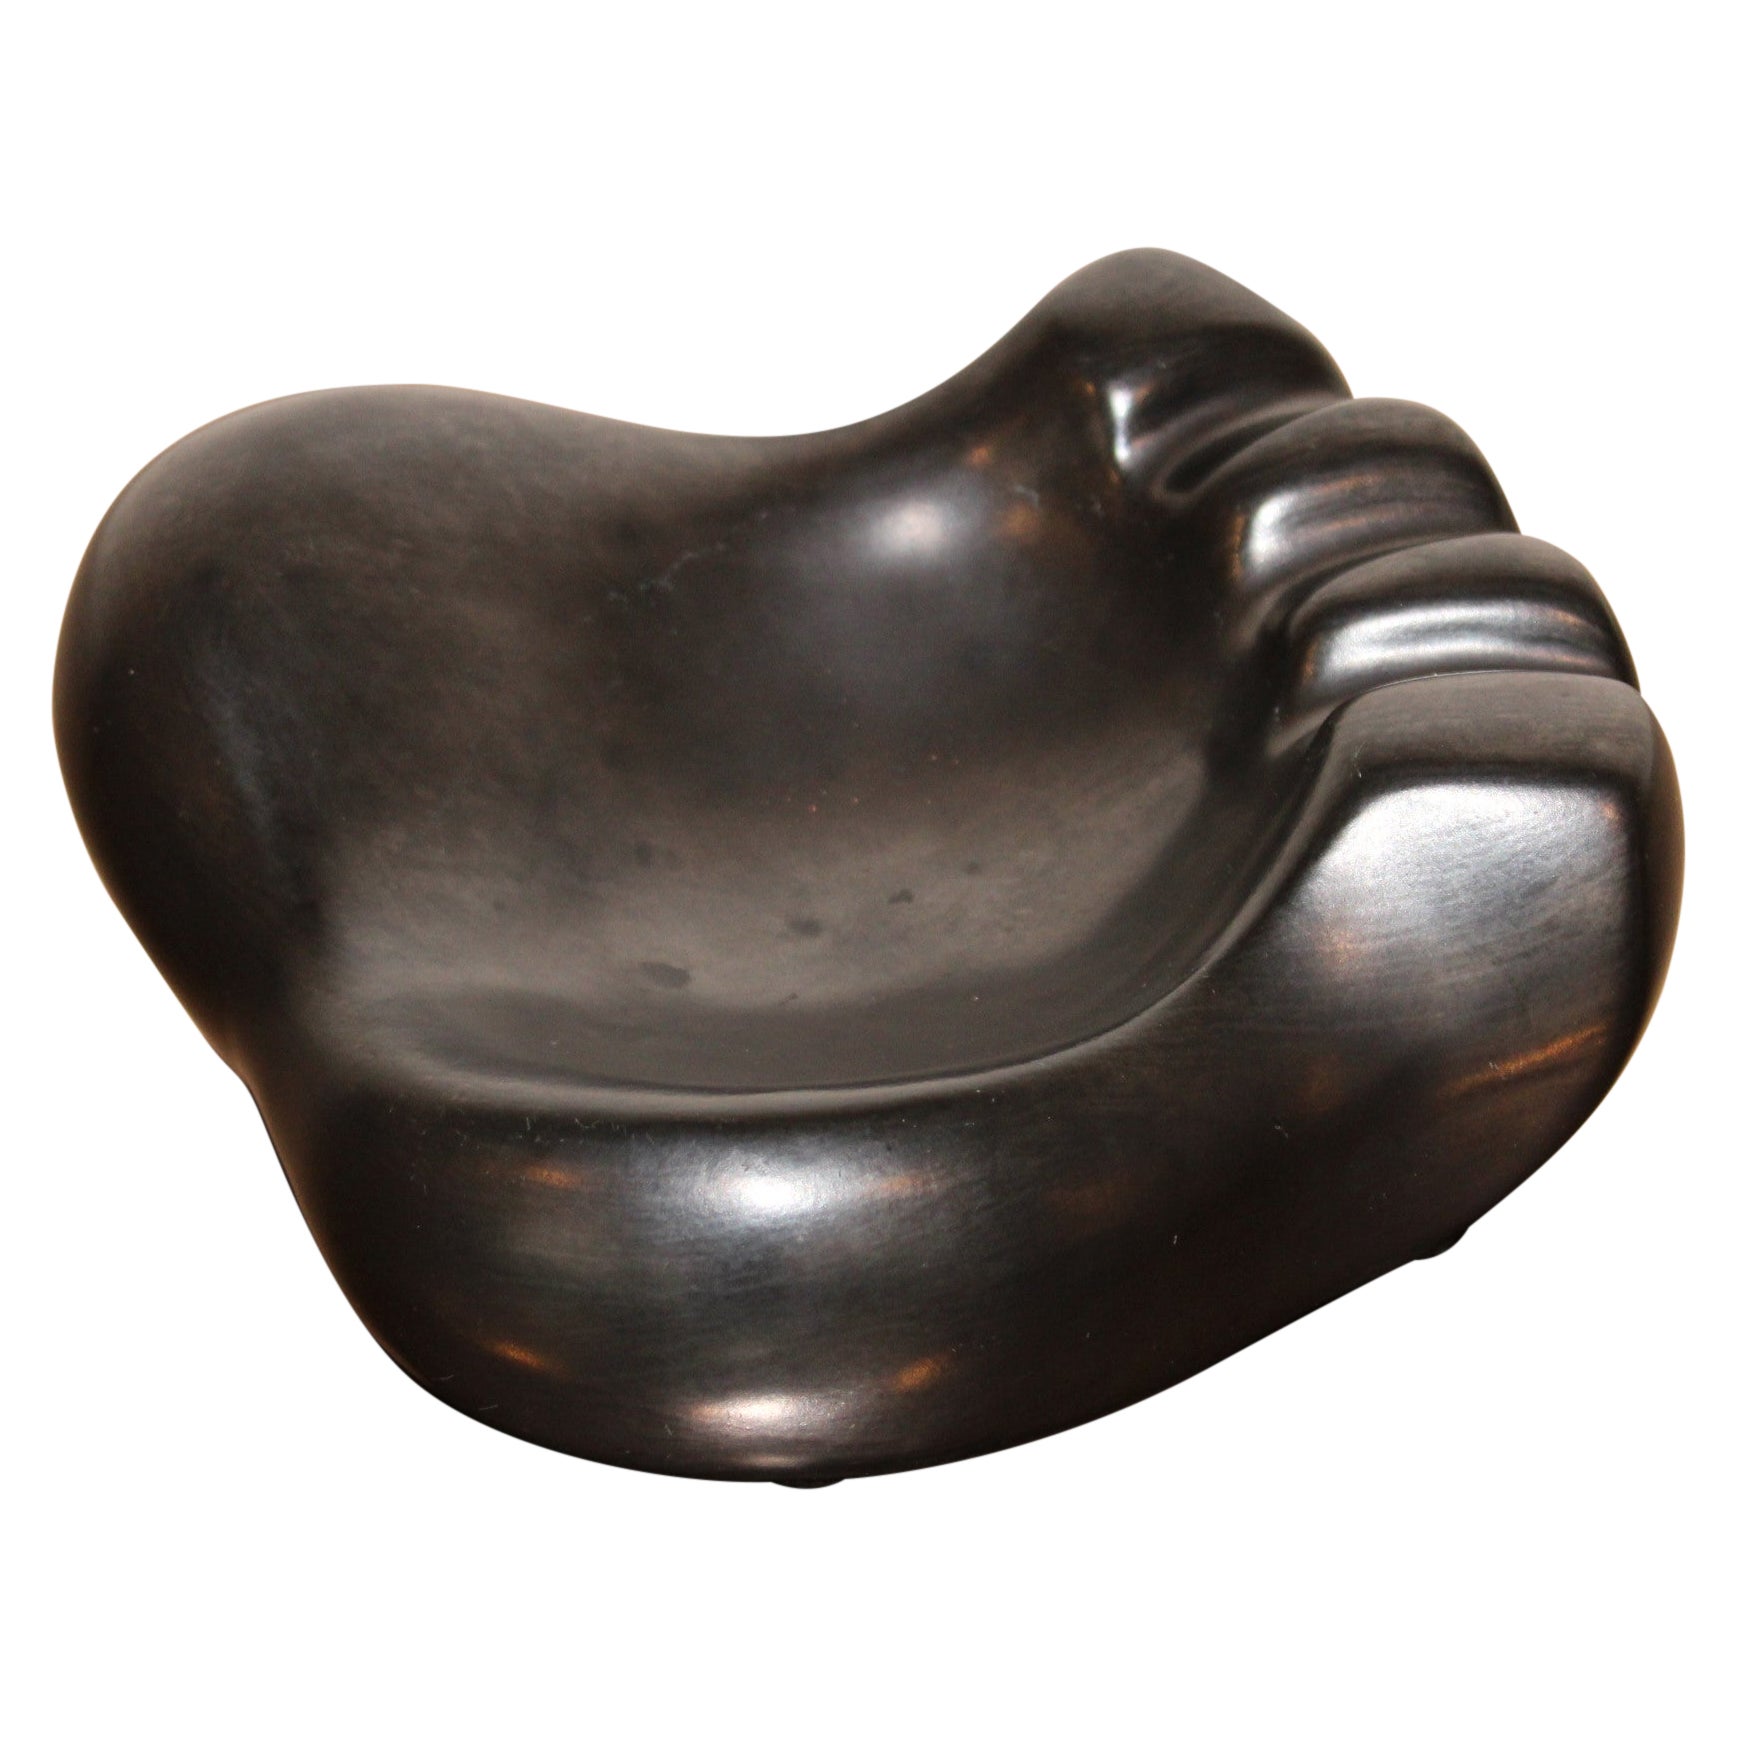 Black Ceramic "Bear Paw" Ashtray by Georges Jouve, France 20th Century